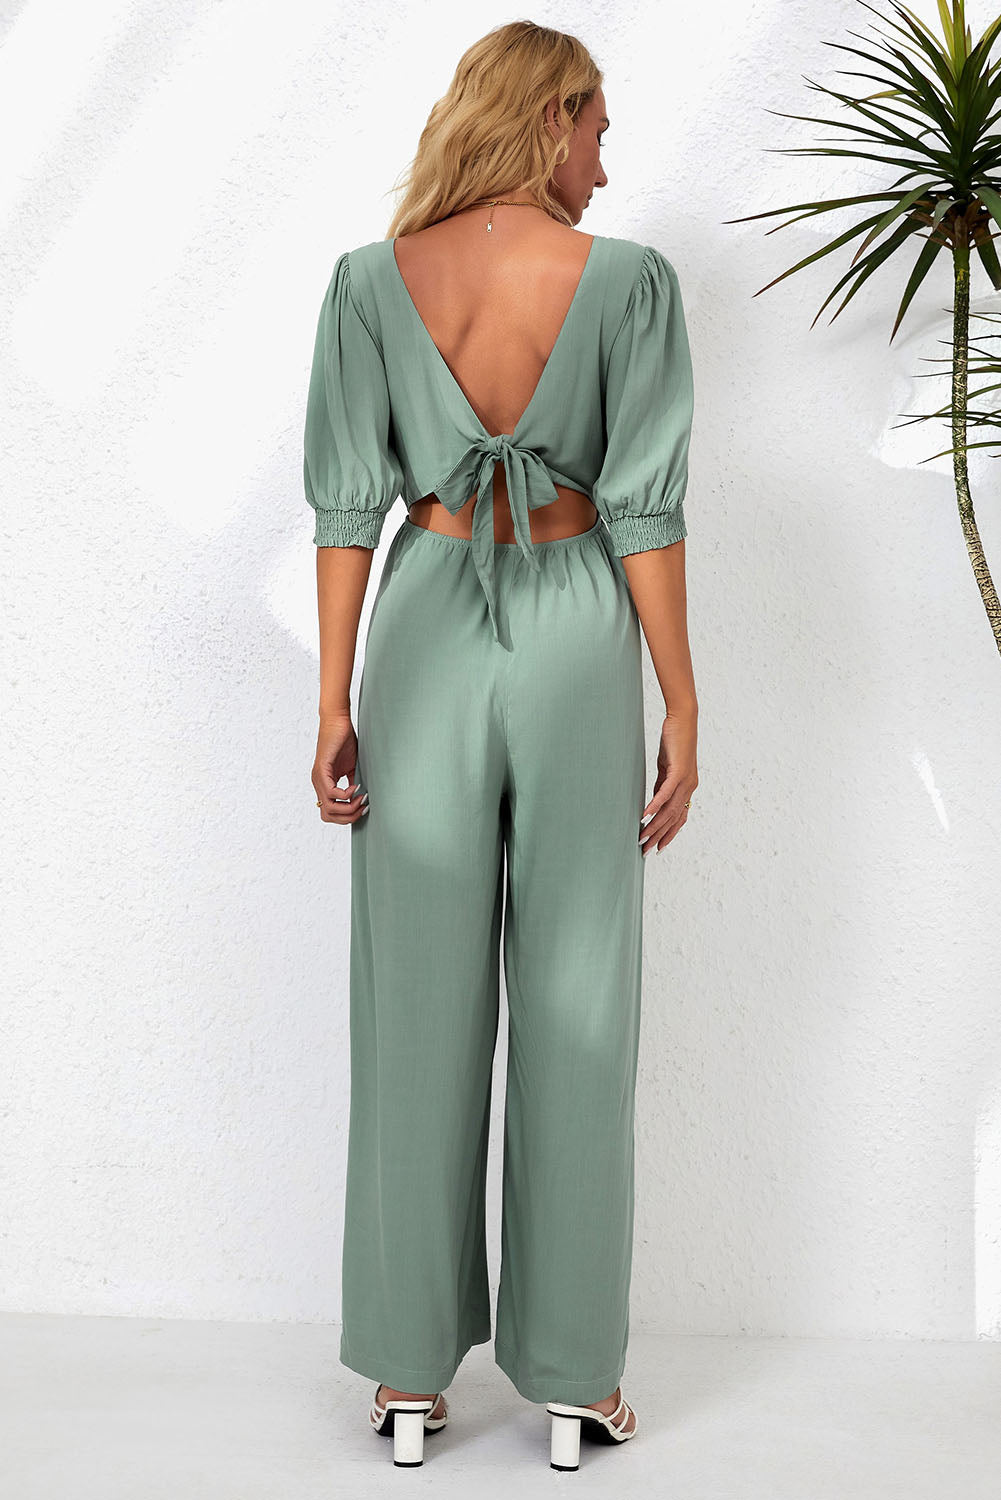 Write Your Own Story Jumpsuit